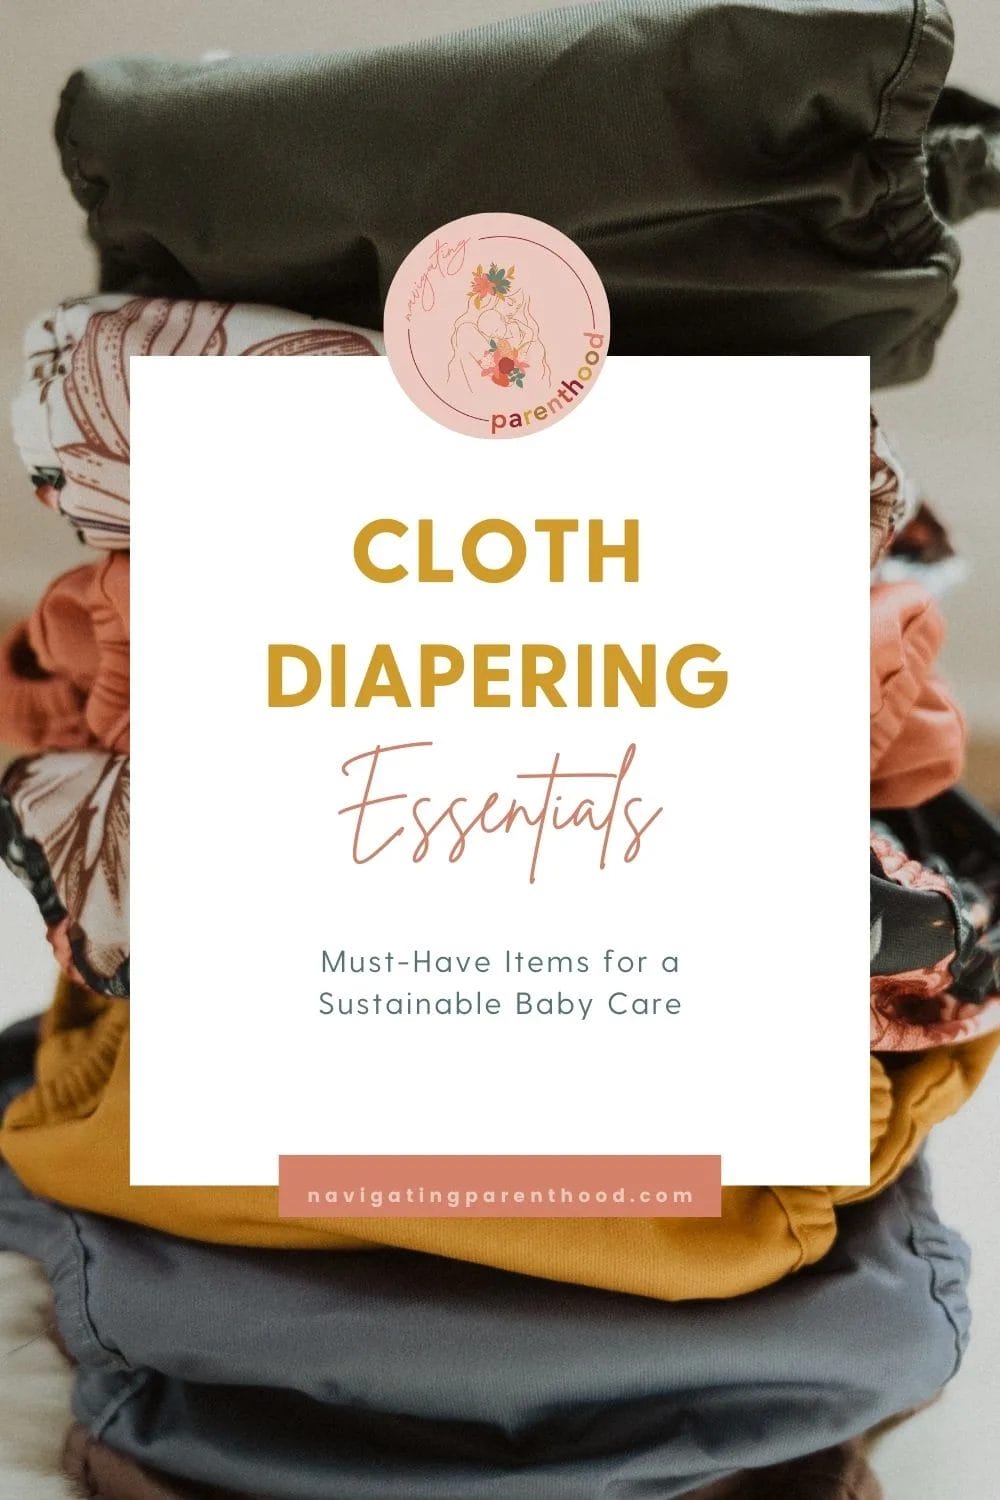 Cloth Diapering Essentials: Must-Have Items for a Sustainable Baby Care